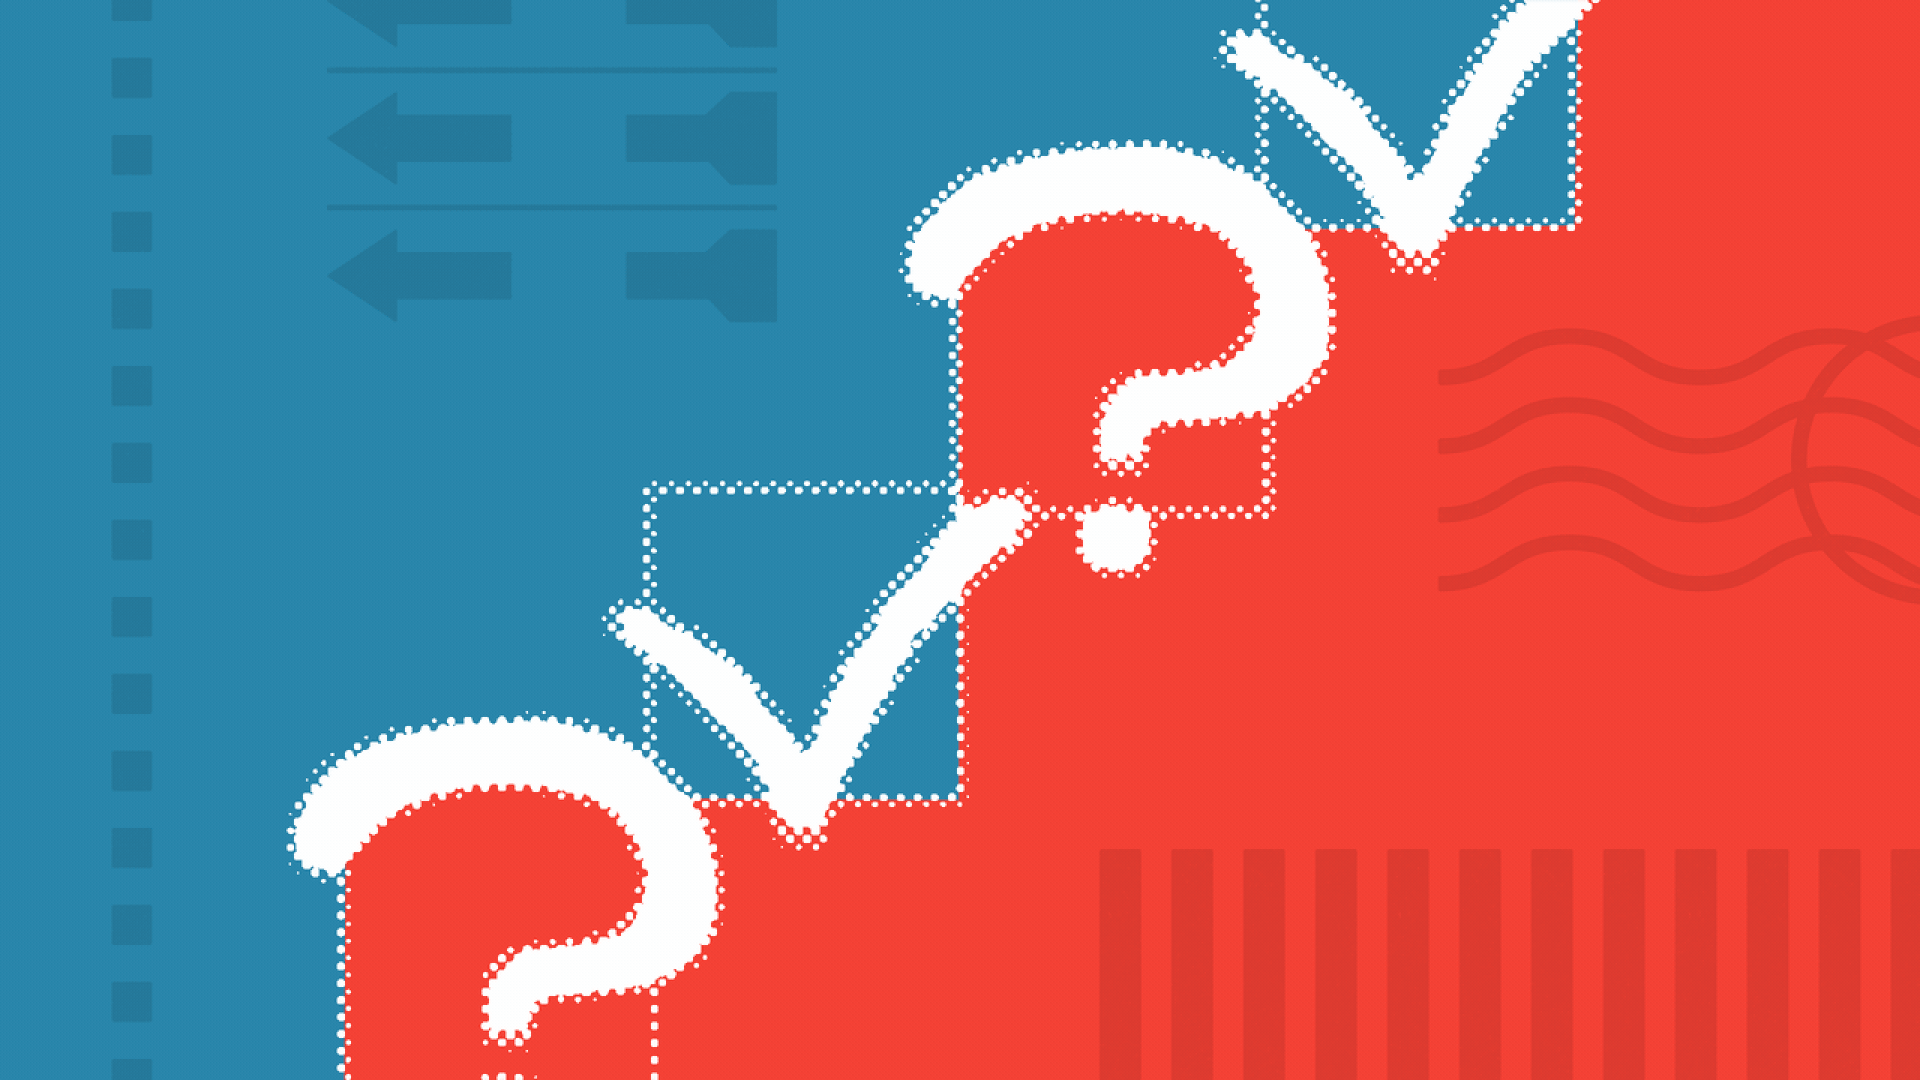 Illustration of a pattern of check marks that turn into question marks and vice versa, on a red and blue background with a pattern of ballot items.